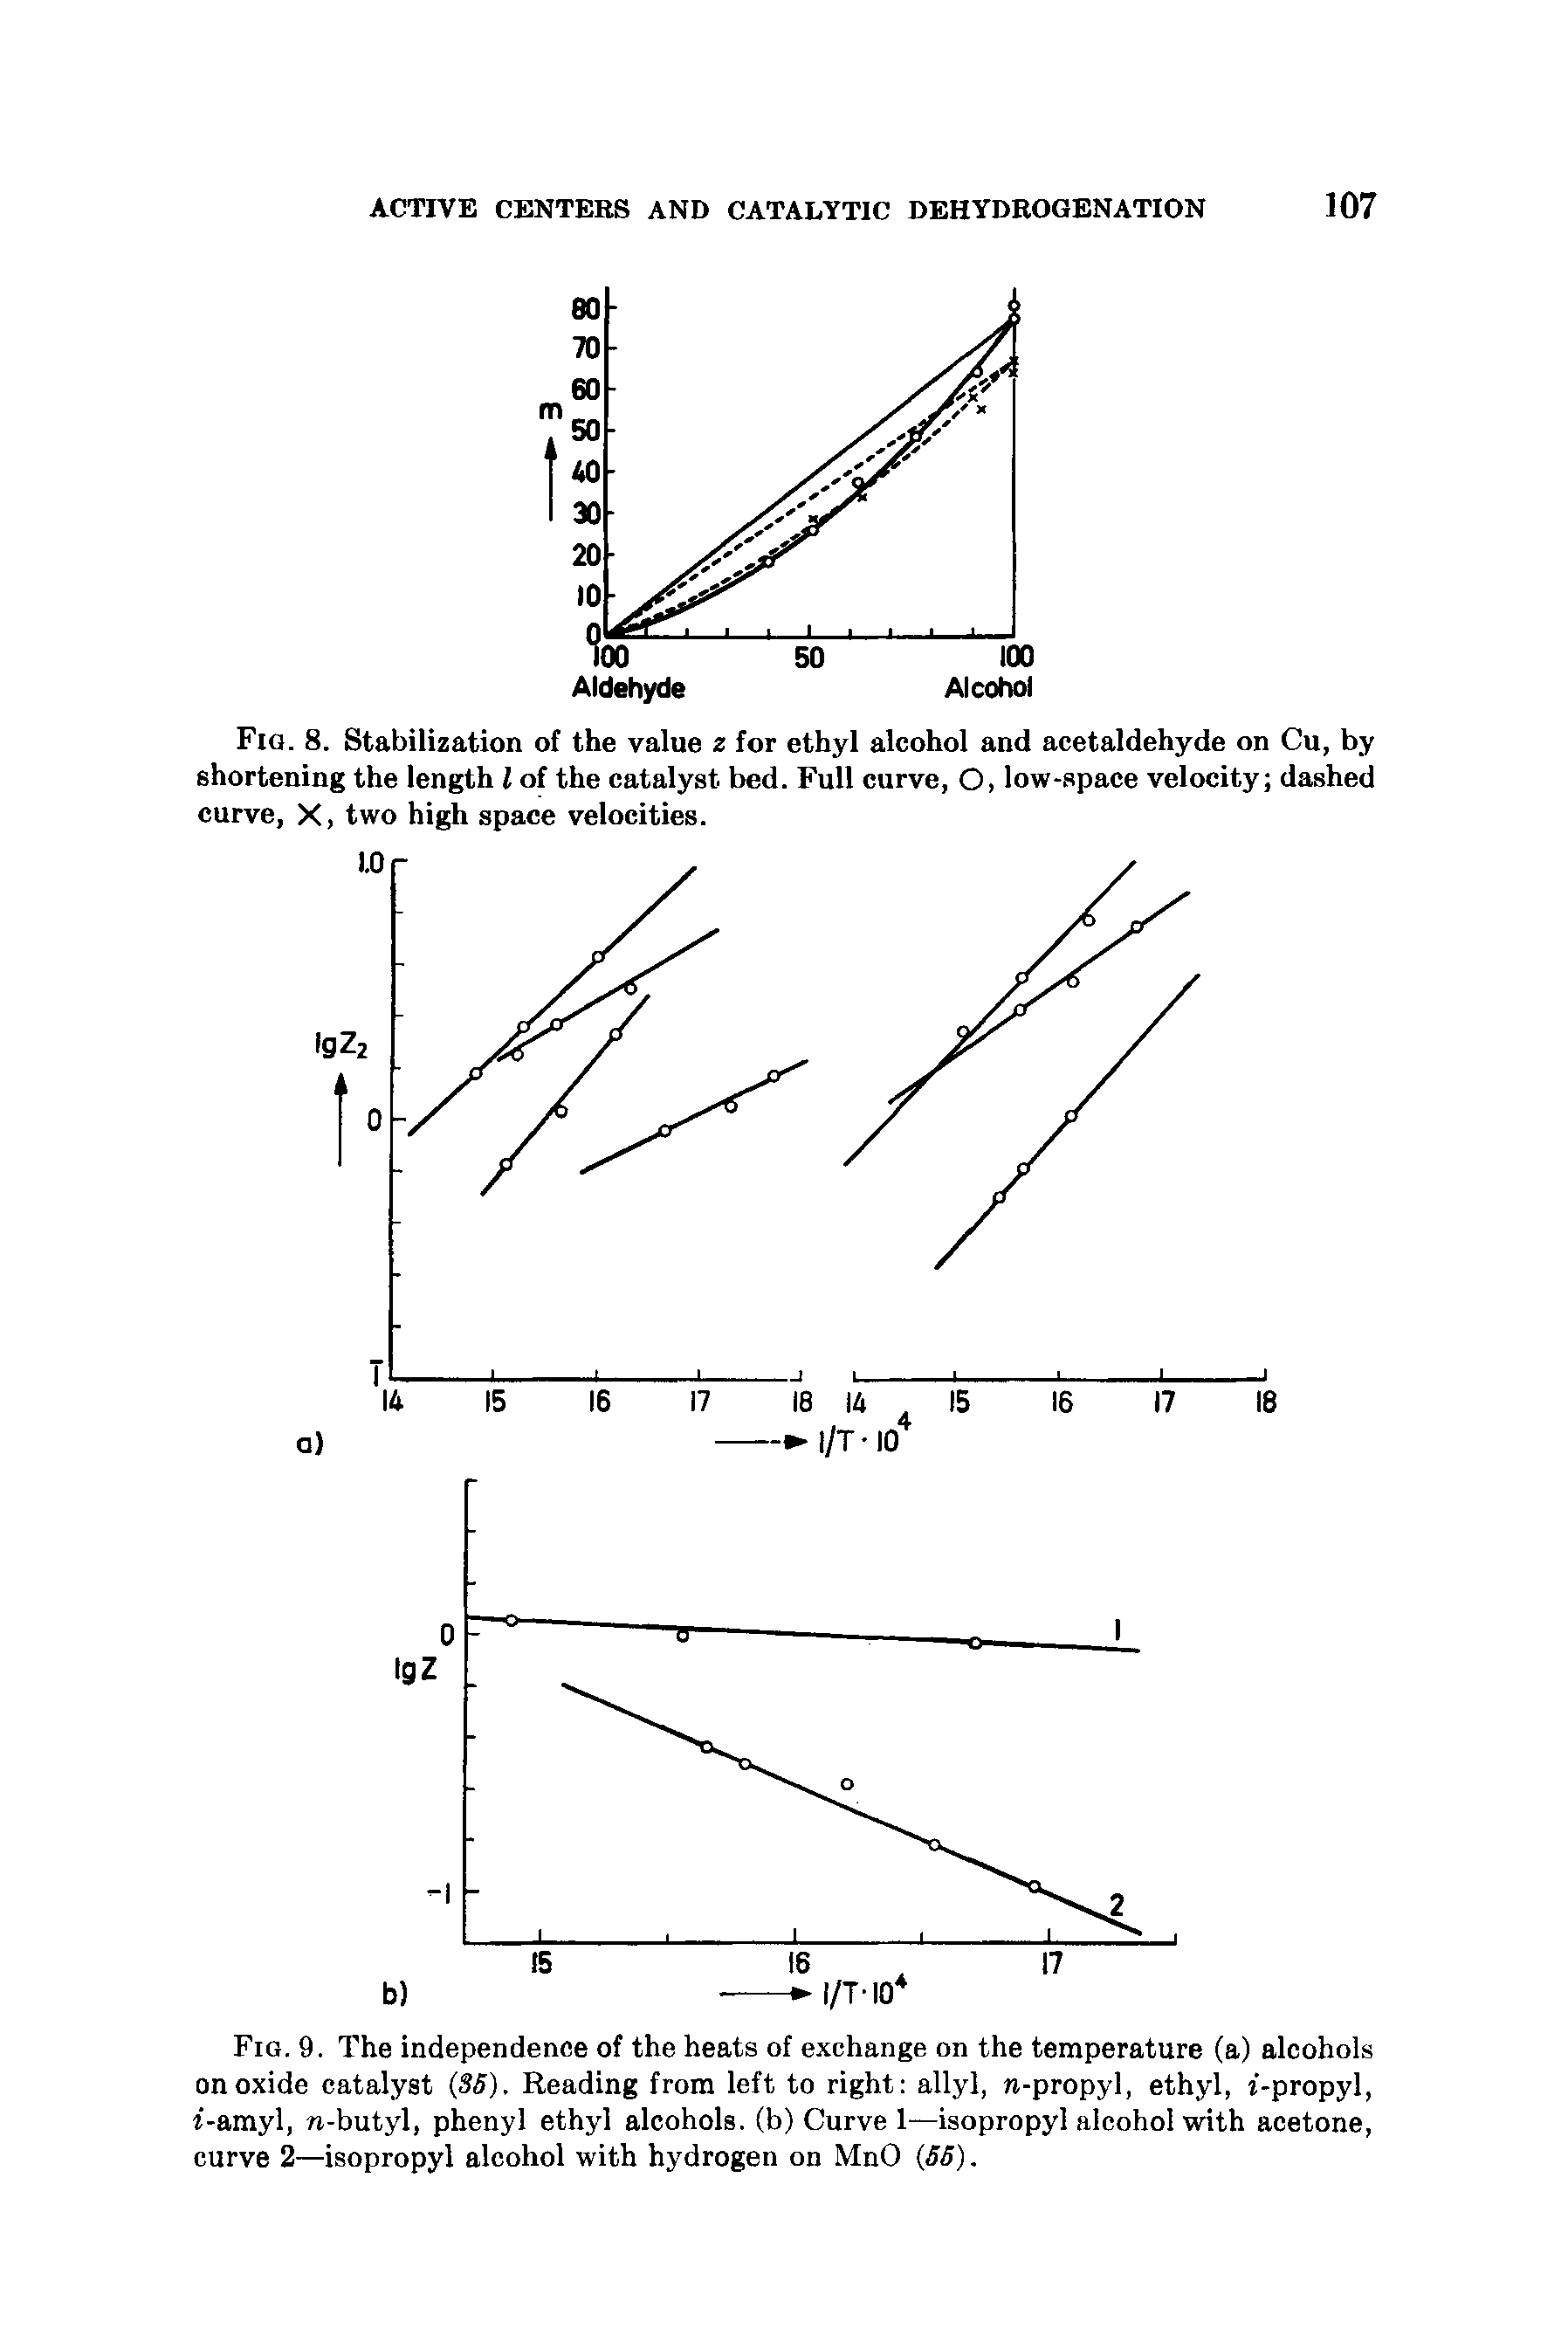 Fig. 8. Stabilization of the value z for ethyl alcohol and acetaldehyde on Cu, by shortening the length l of the catalyst bed. Full curve, O, low-space velocity dashed curve, X, two high space velocities.